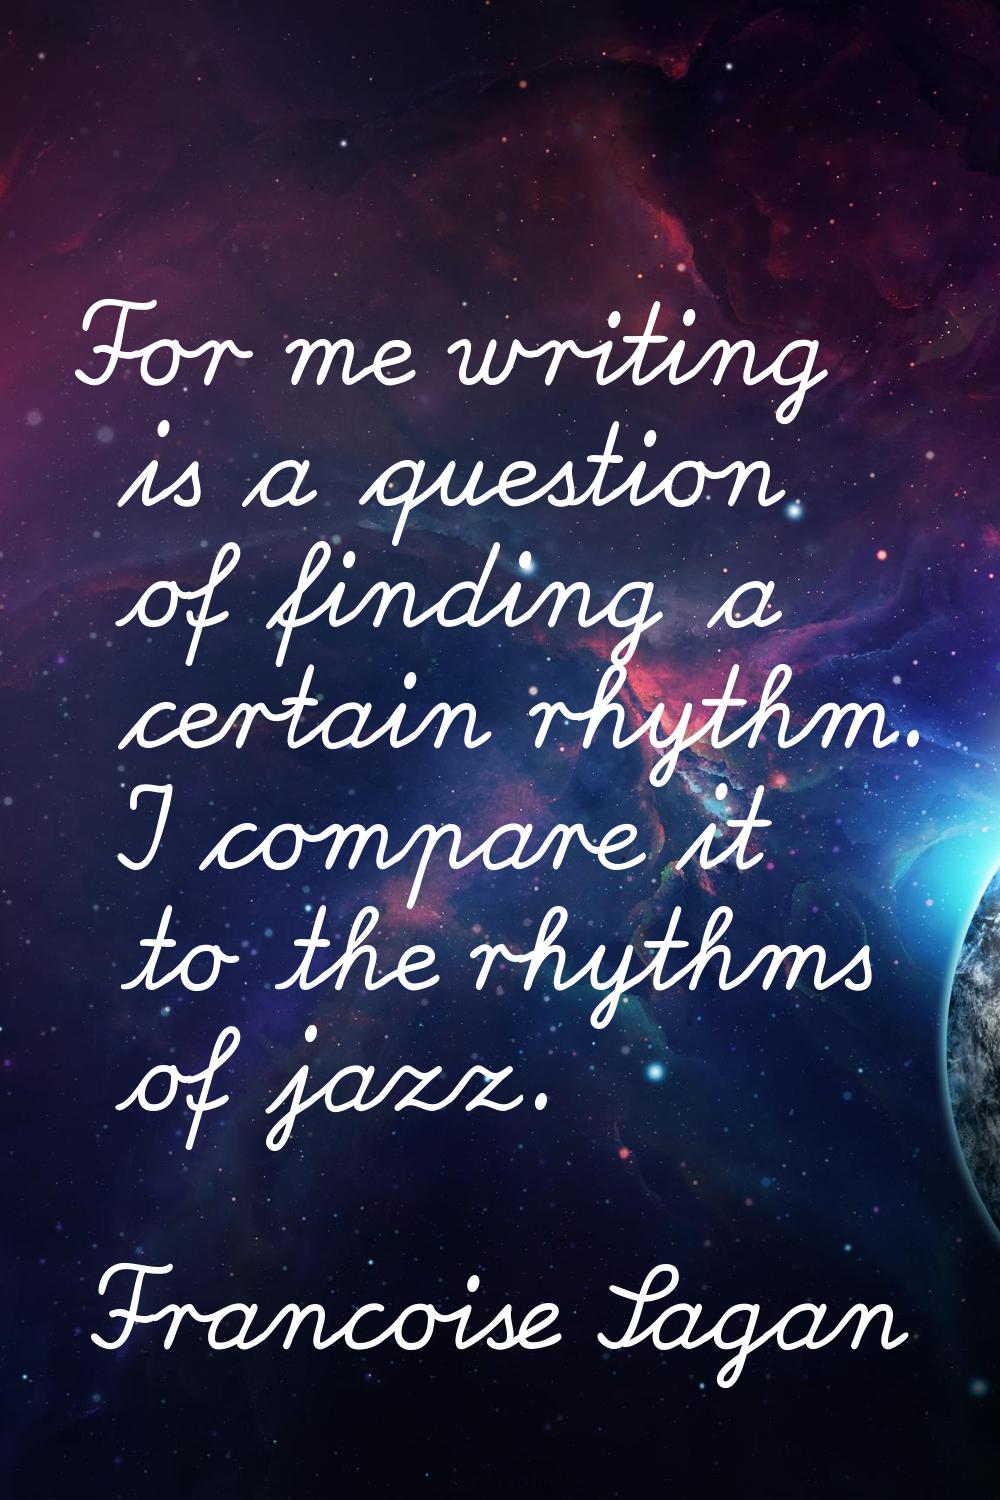 For me writing is a question of finding a certain rhythm. I compare it to the rhythms of jazz.